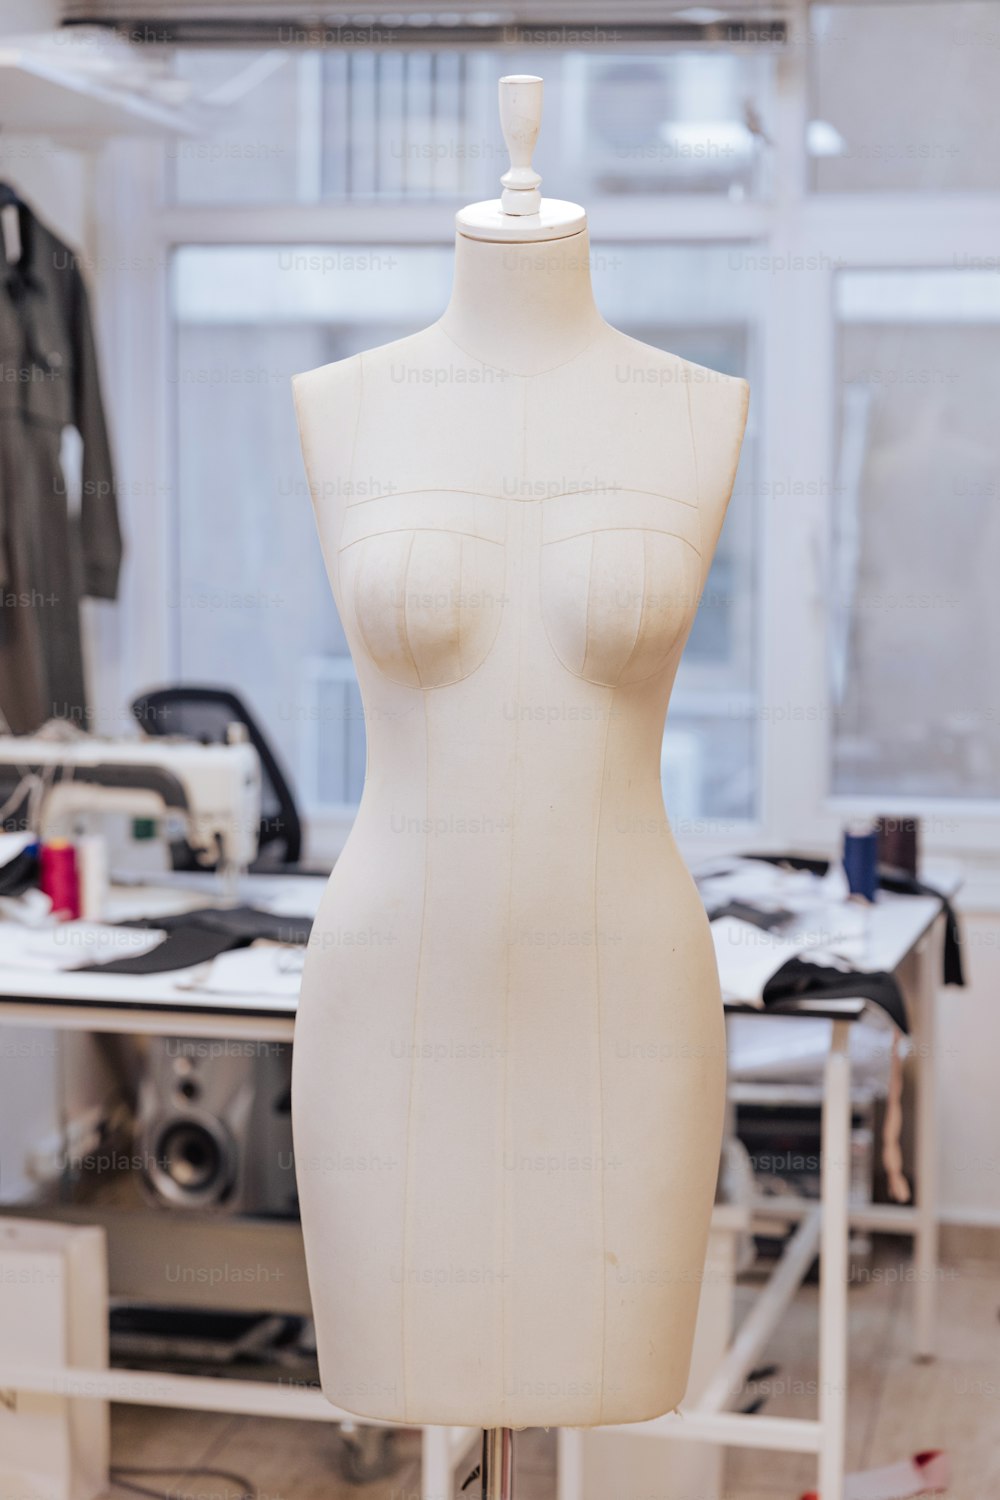 a white mannequin is on a stand in a room